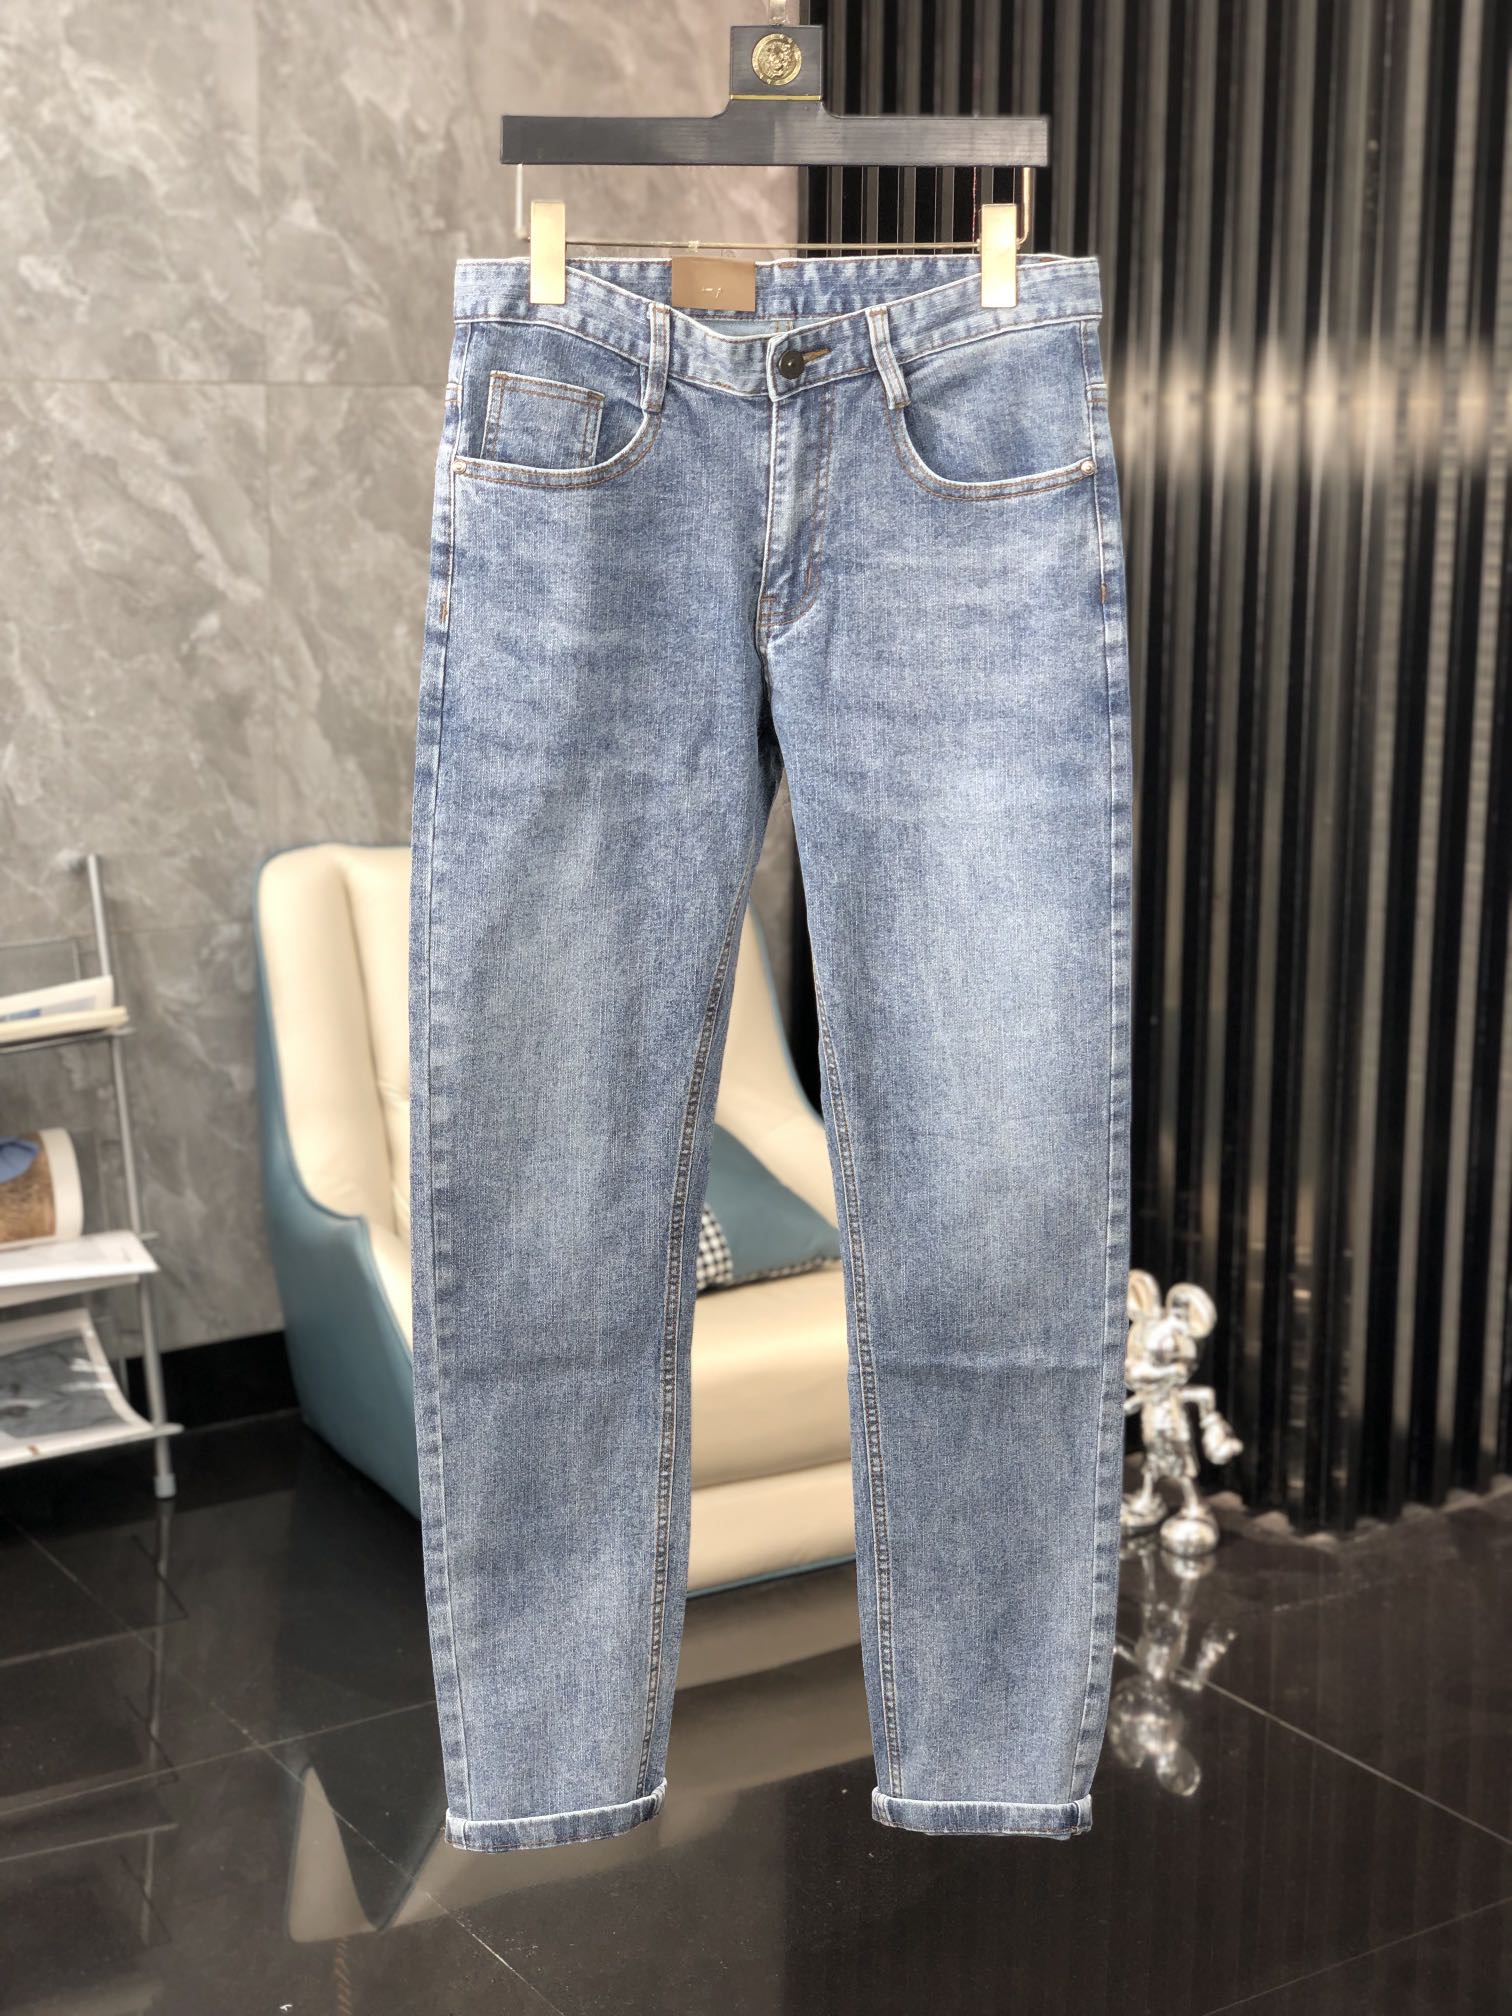 Burberry Clothing Jeans Men Denim Genuine Leather Fall Collection Fashion